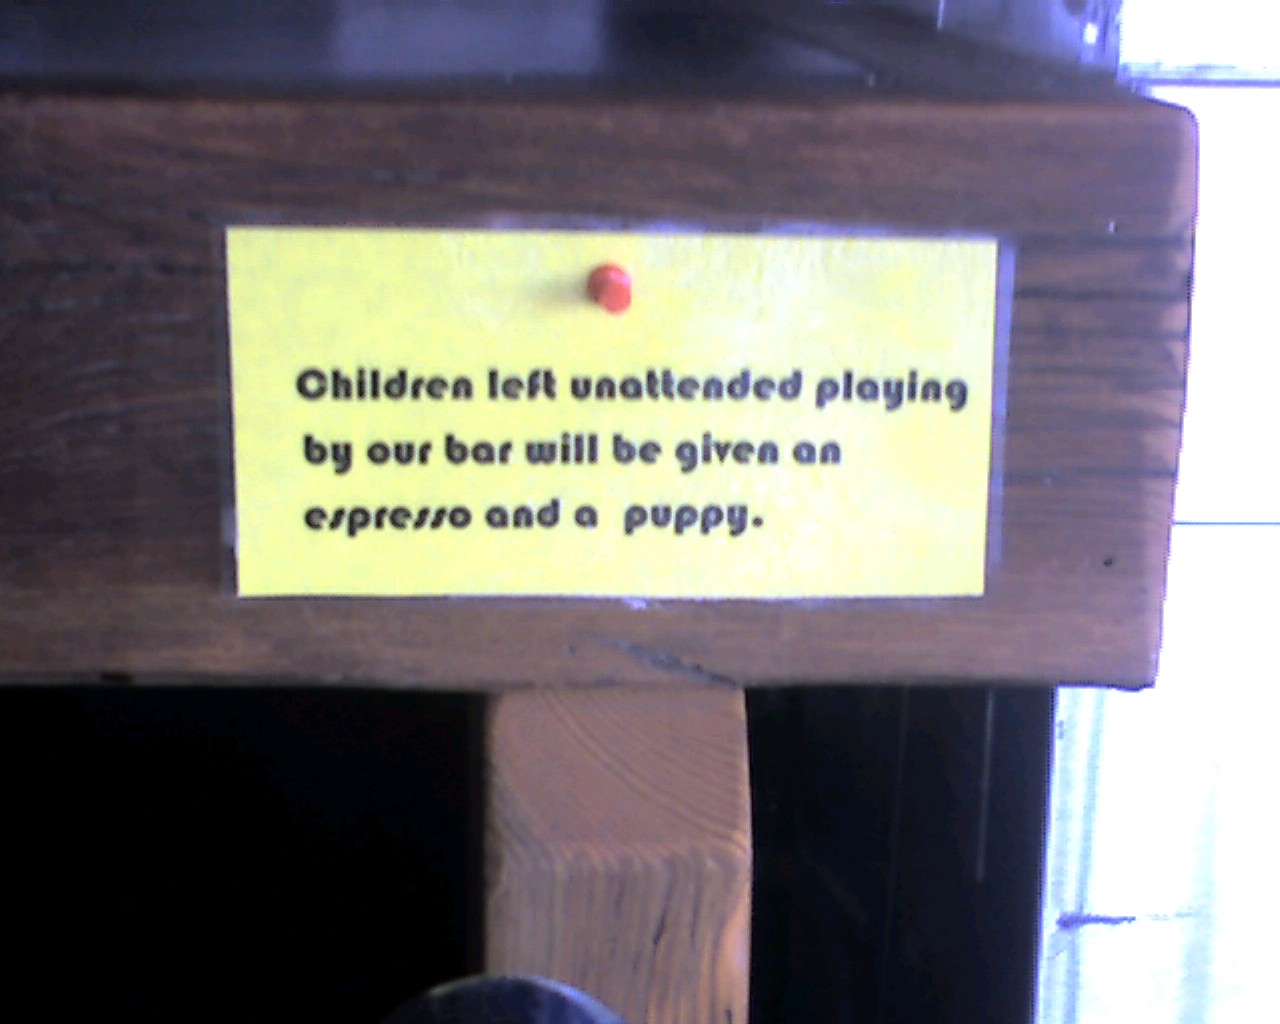 This should effectively limit the number of unattended children found in this establishment.